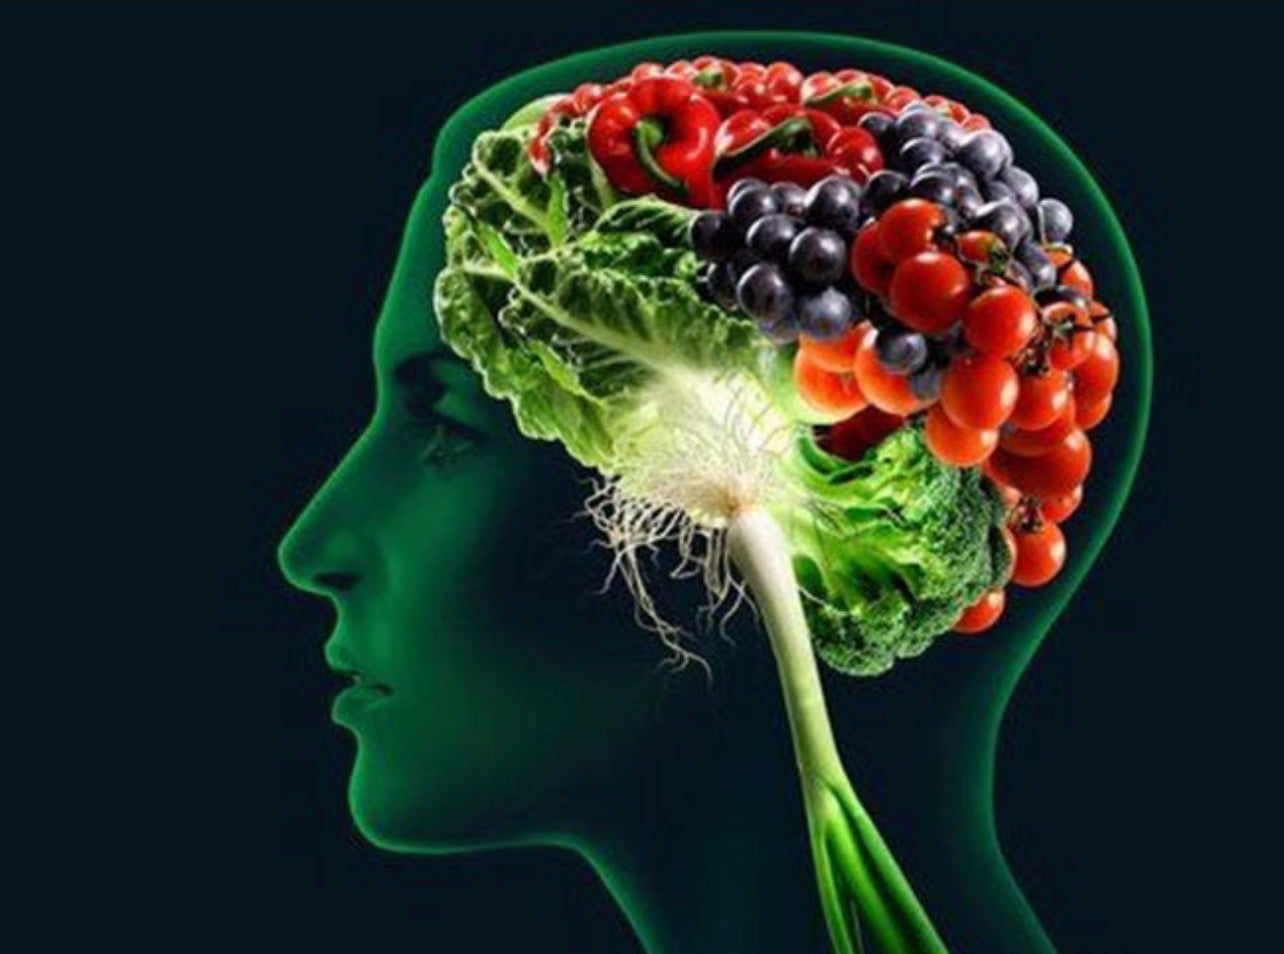 Neuro-Nutrition: Training Your Brain to Crave Healthier Foods